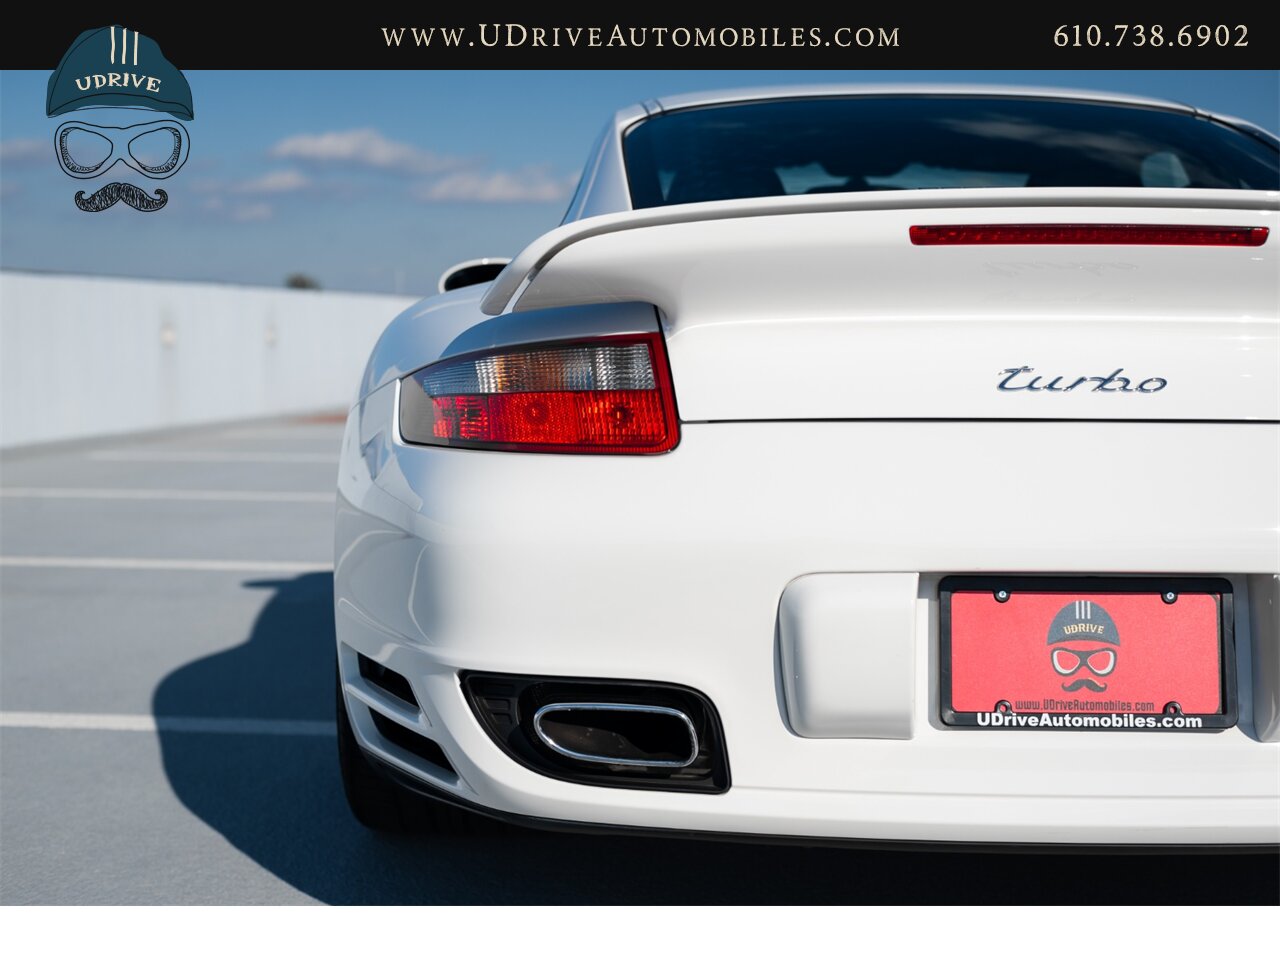 2007 Porsche 911 Turbo 642 Miles 1 Owner Carrara White 997  Sport Chrono Adaptive Sport Seats All Documentation from New - Photo 18 - West Chester, PA 19382